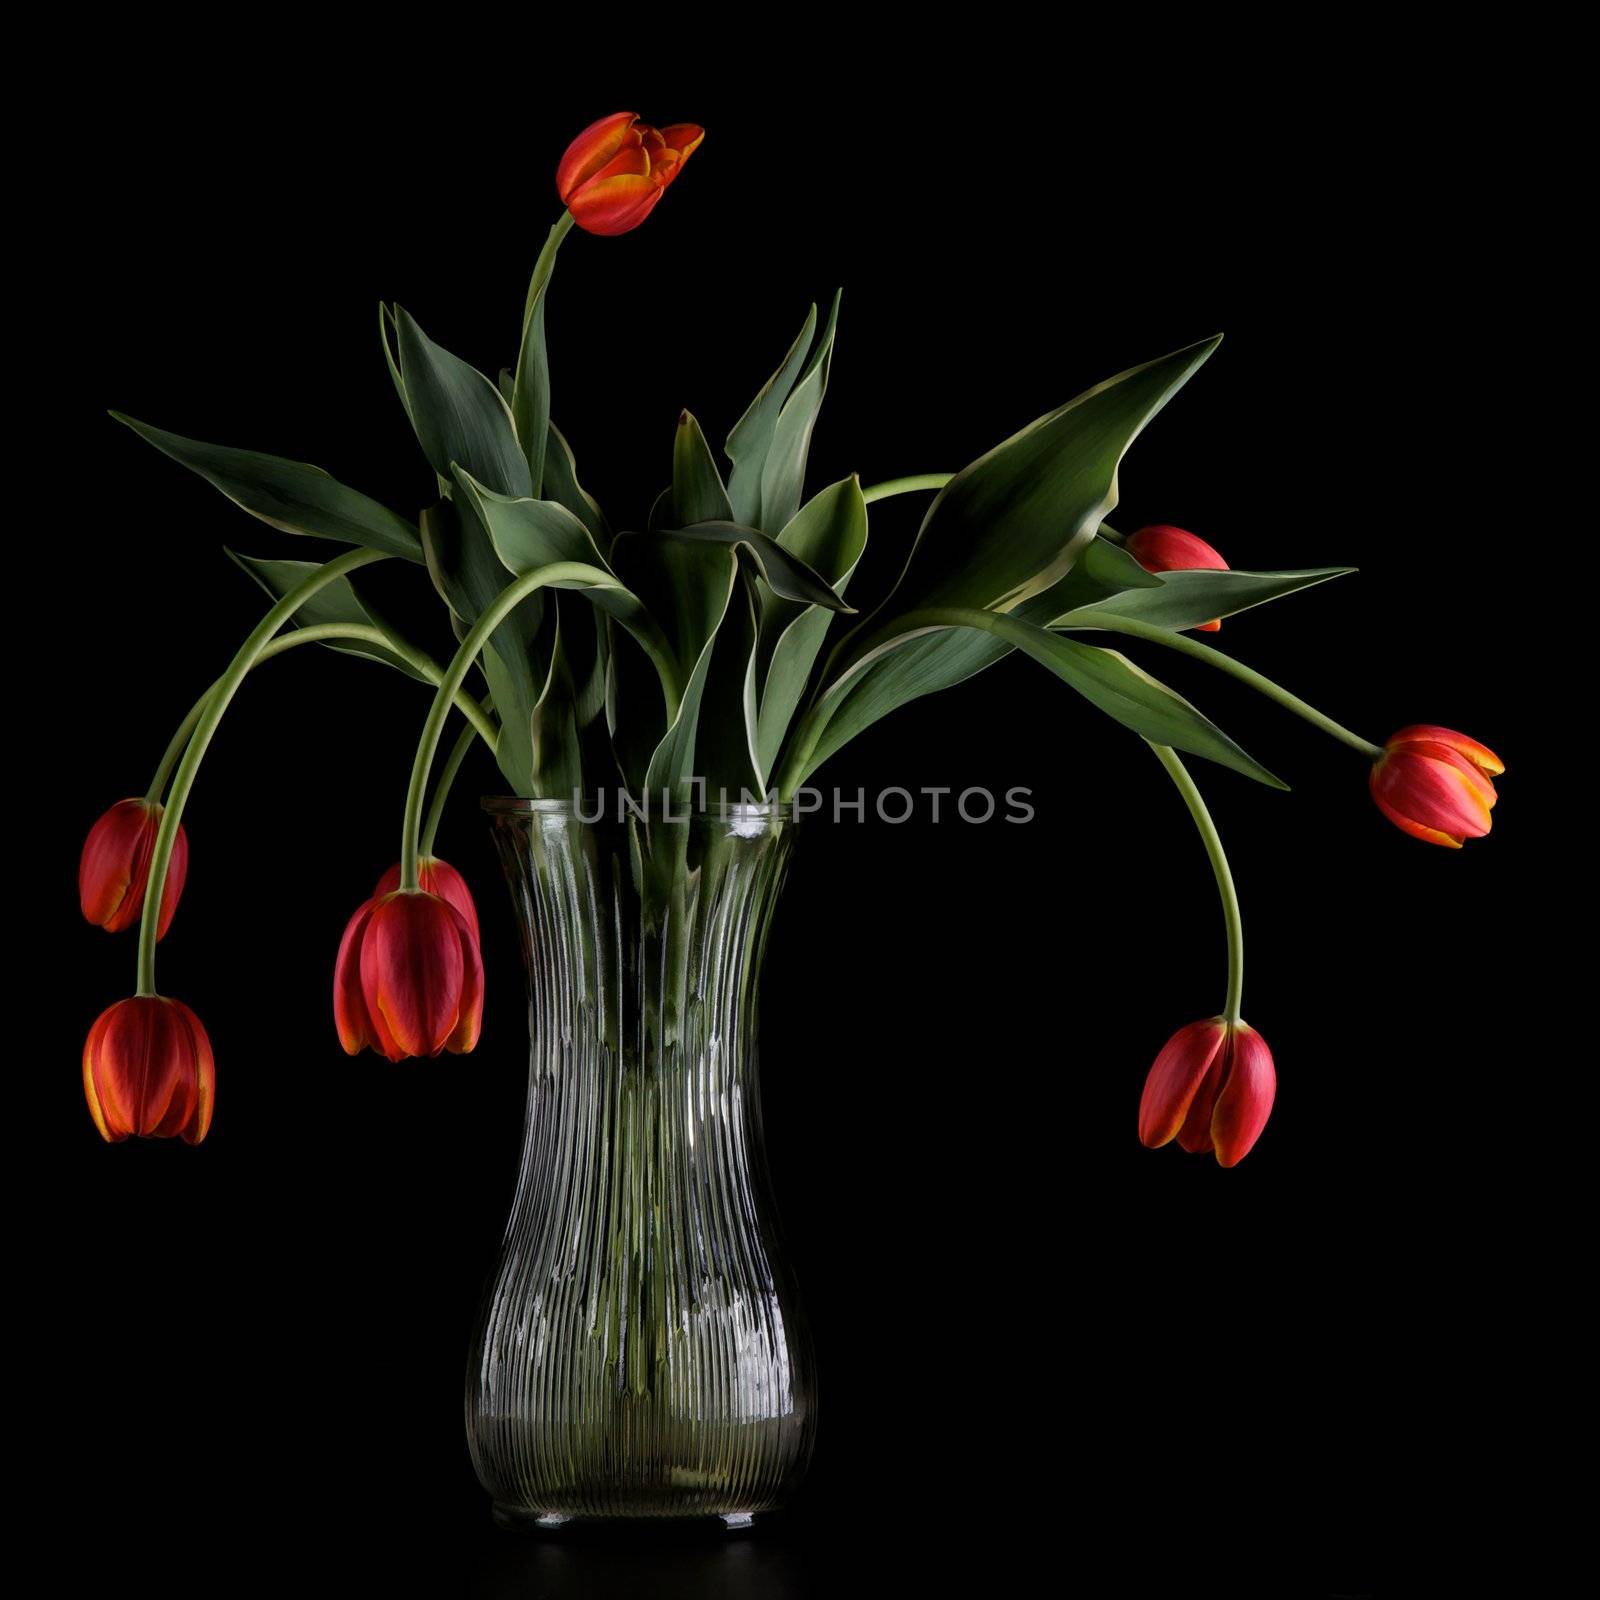 Vase with wilting tulips on a black background